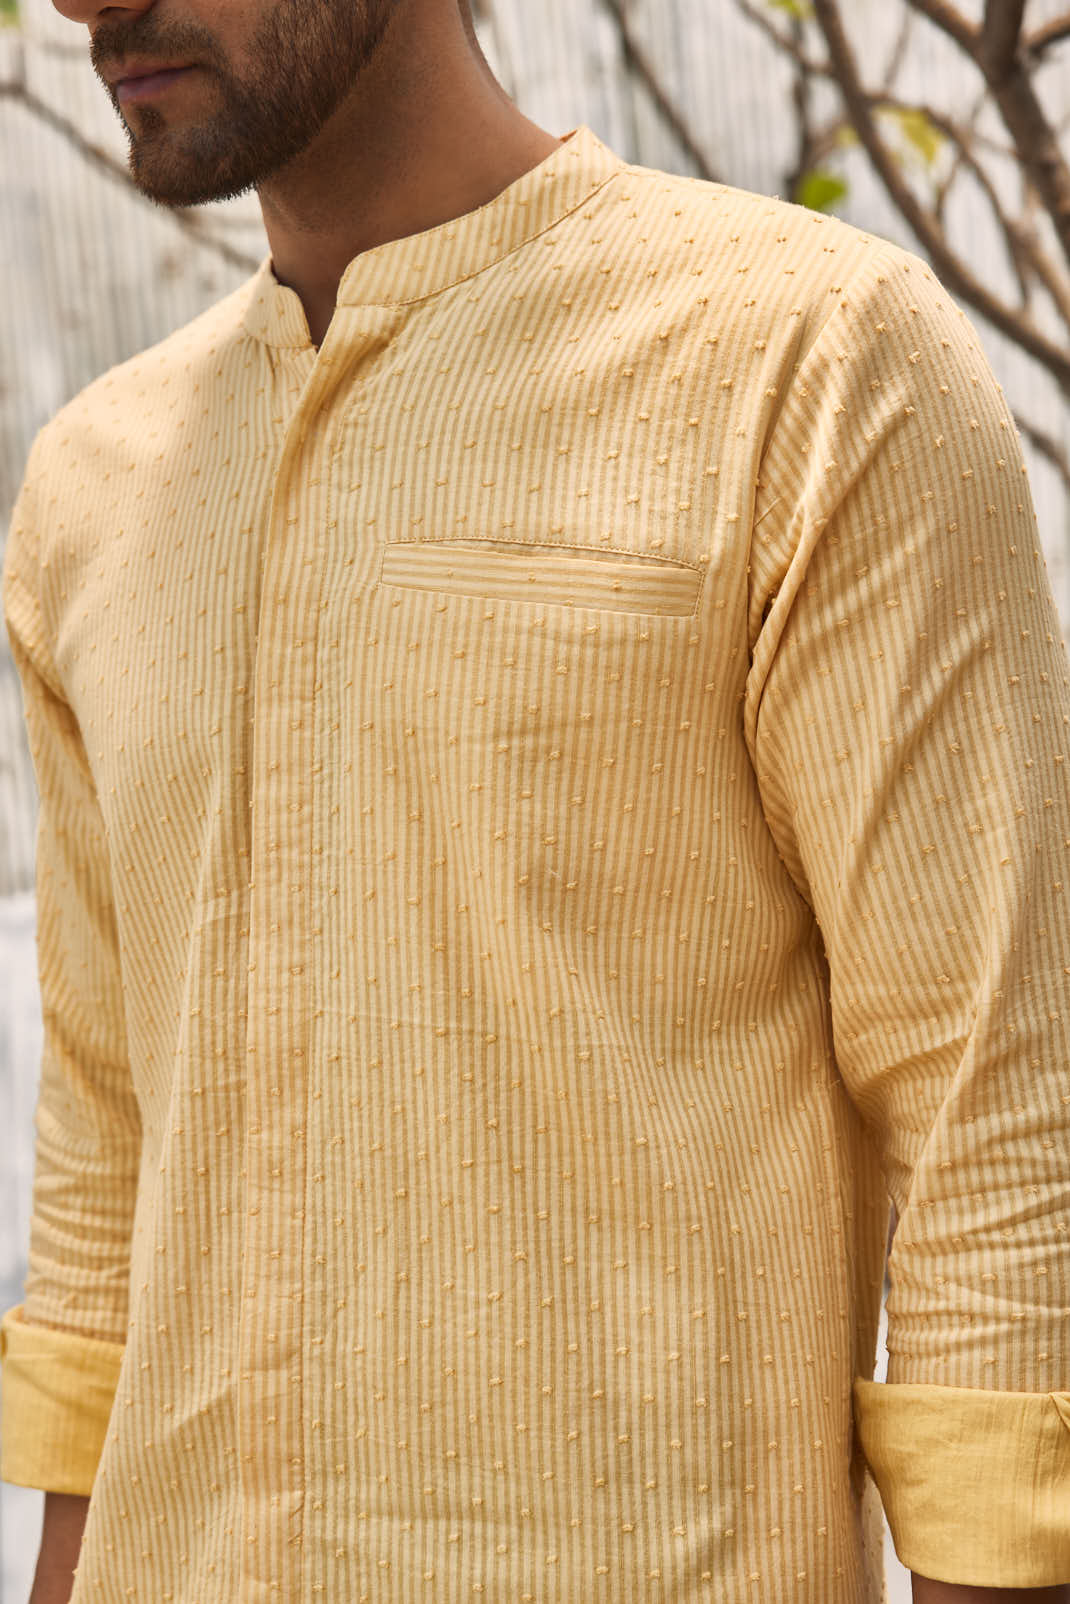 Cotton Placket Kurta - Yellow at Kamakhyaa by Charkhee. This item is Cotton, Dobby Cotton, Festive Wear, For Him, Kurtas, Menswear, Natural, Regular Fit, Shores 23, Textured, Tops, Wedding Gifts, Yellow